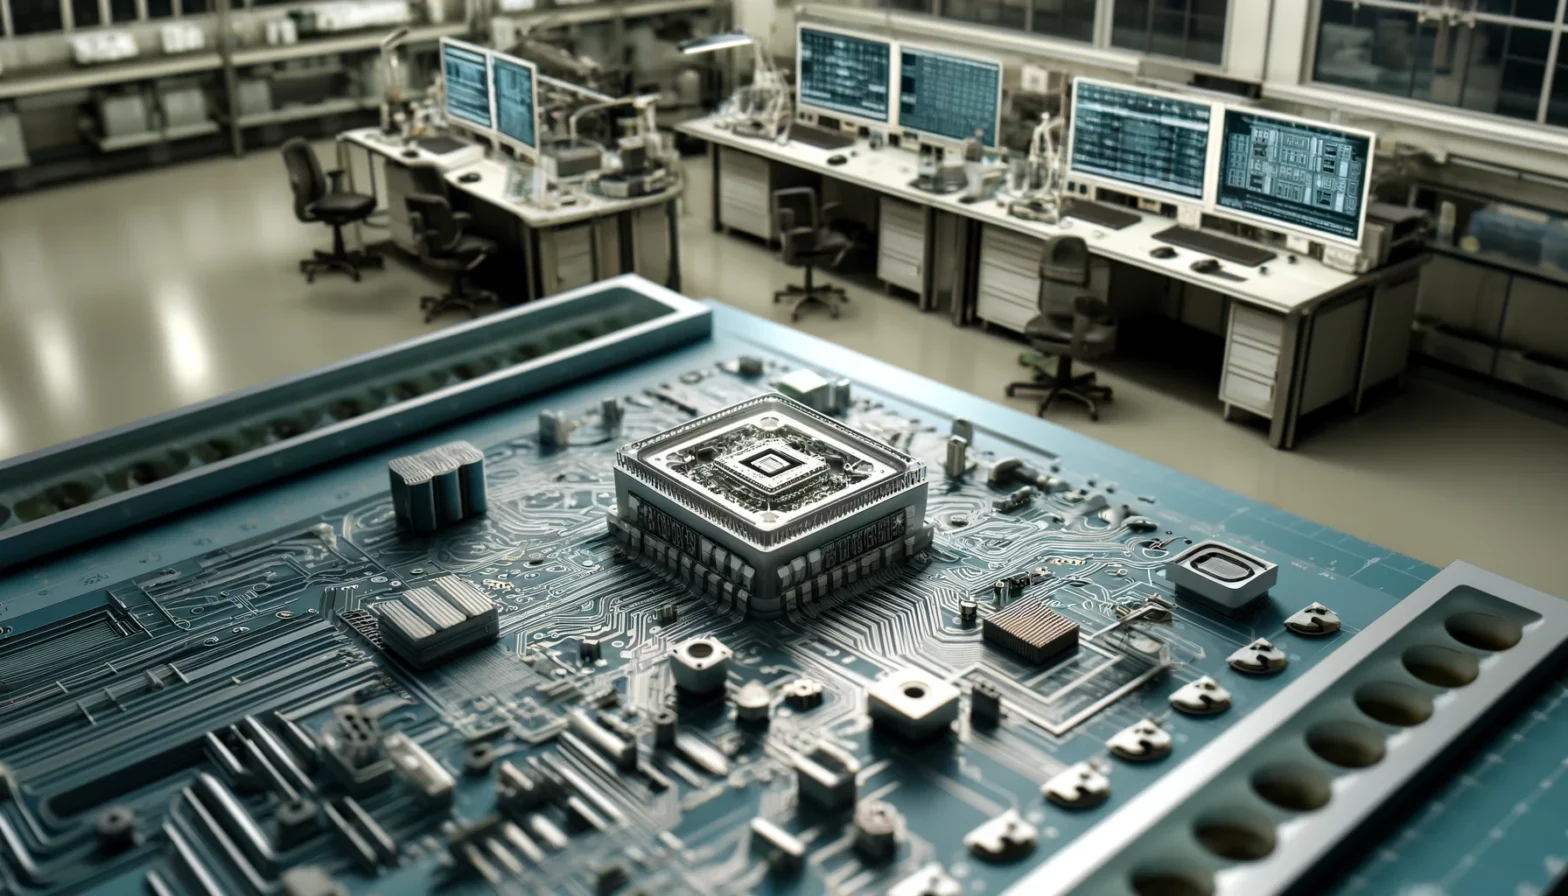 Detailed image of an advanced Integrated Printed Circuit Board (IPCB) in a state-of-the-art electronics lab.